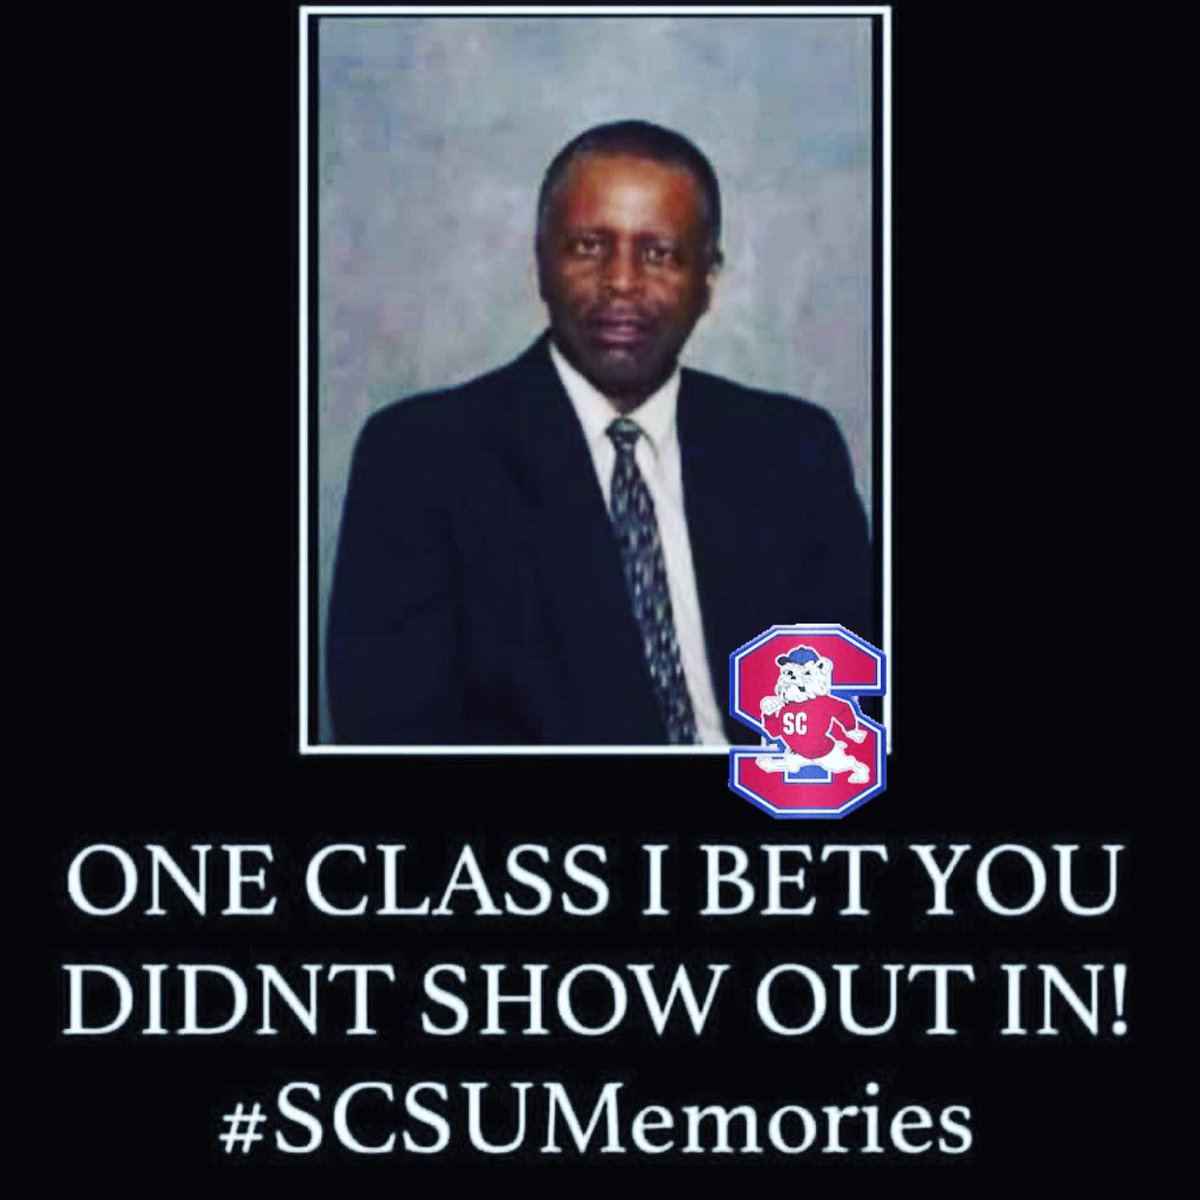 If you’ve graced the classic halls @SCSTATE1896 from the 80’s until now you’ve crossed the path of this Bulldog Legend ♥️💙 Leon Myers!Rest In Peace #scstate won’t be the same without you but, better because we had you sir 🕊 #math #hbcu #blackprofessorsmatter #scsumemories